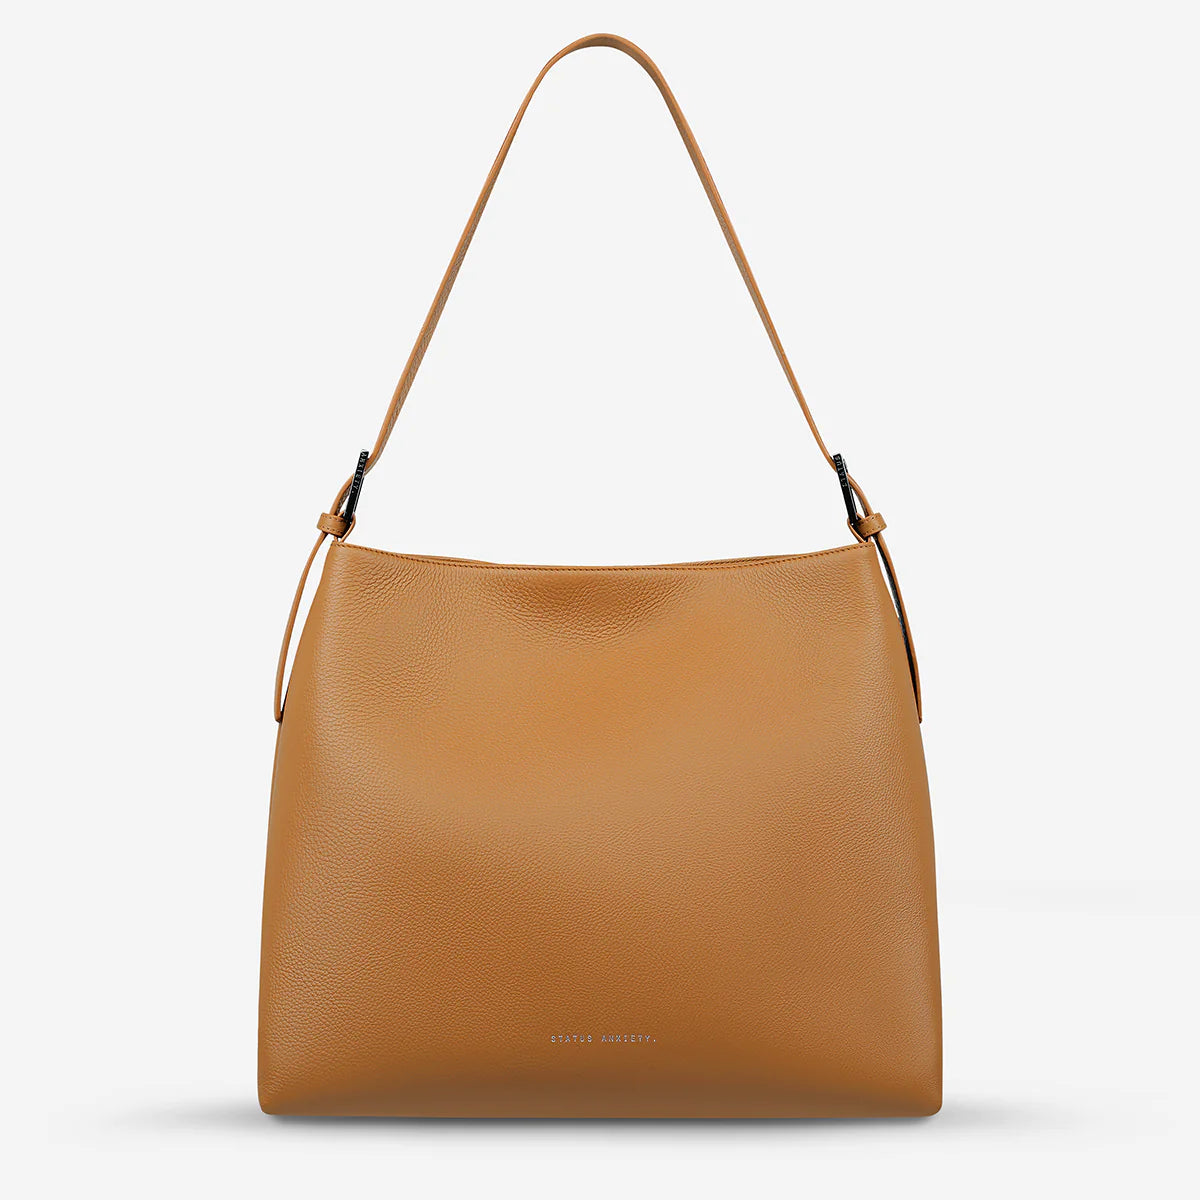 Forget About It Leather Bag in Tan